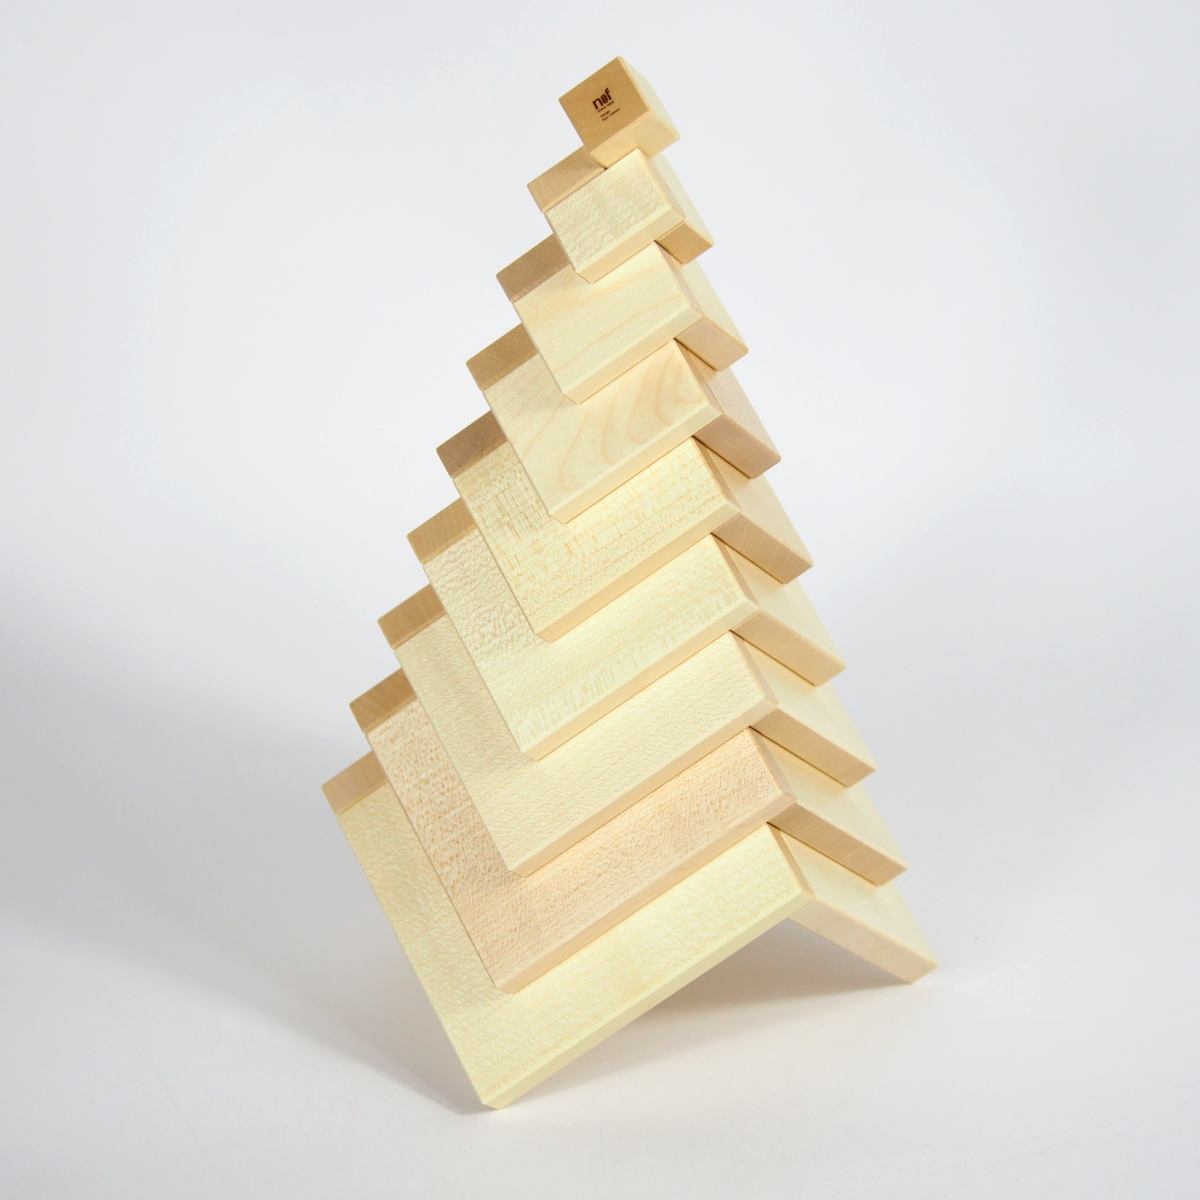 Cella (Natural) – Original Construction Game by Naef, made of Wood